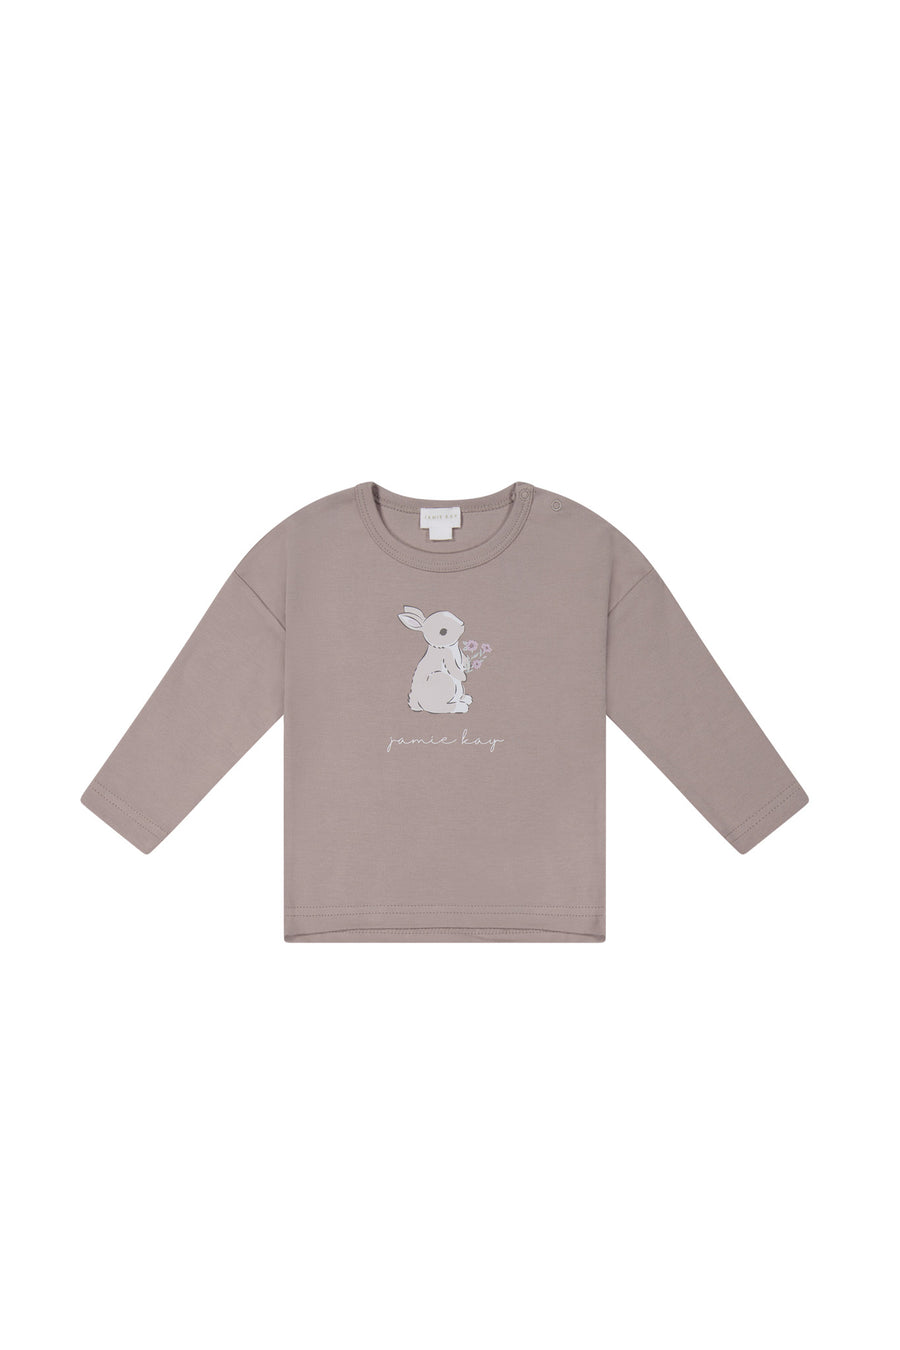 Pima Cotton Marley Long Sleeve Top - Lavender Musk Childrens Top from Jamie Kay NZ